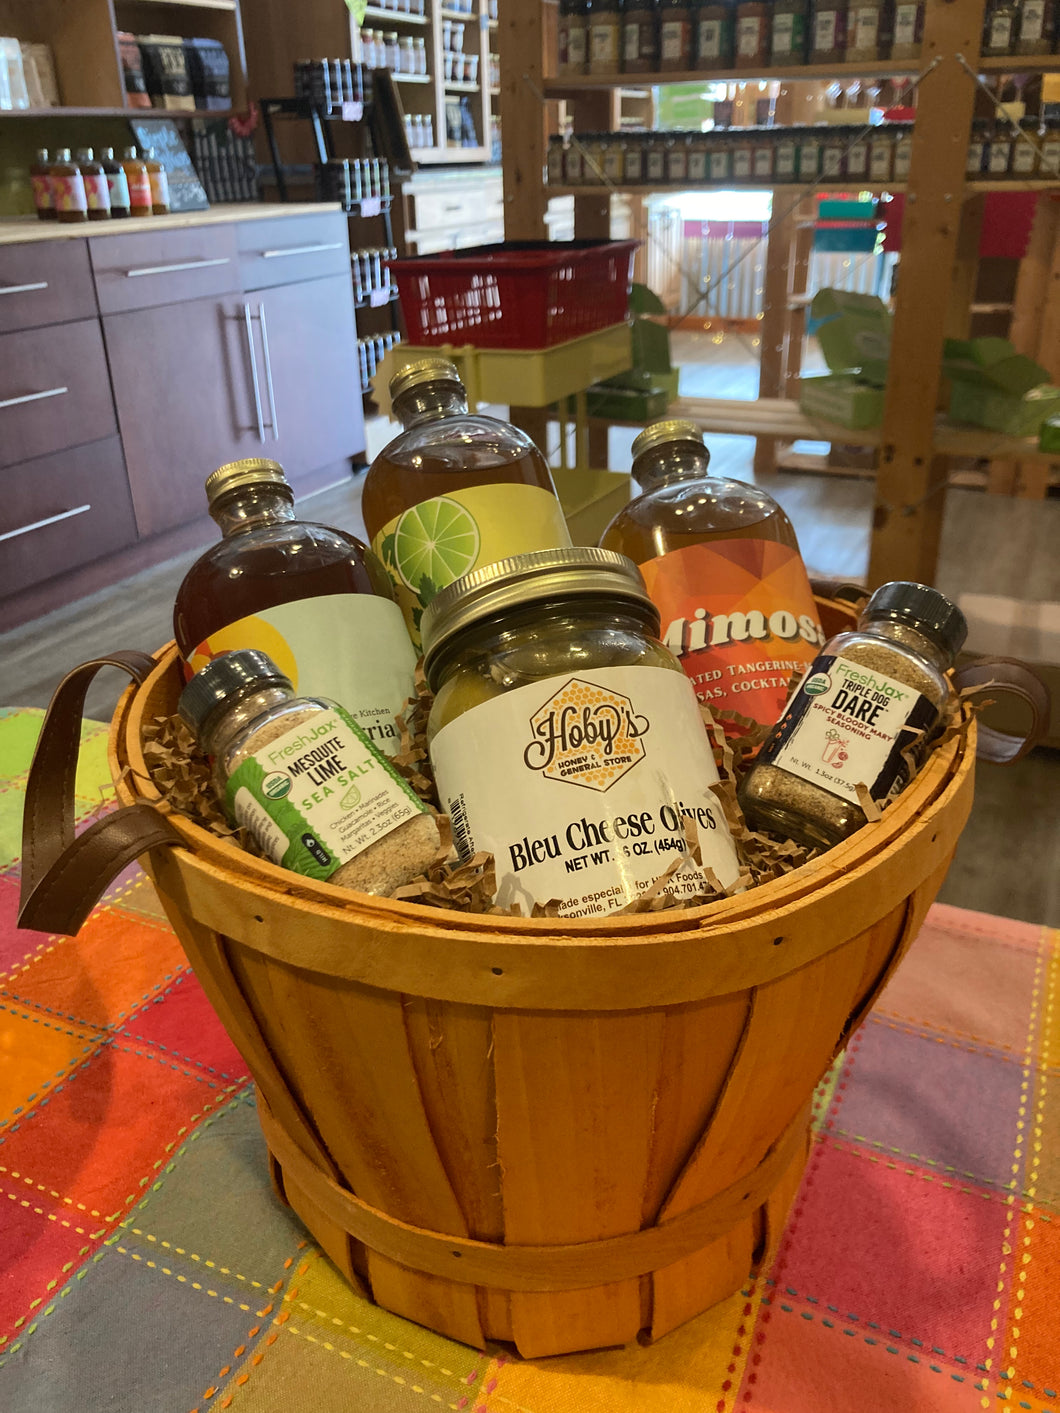 The Cocktail Collection Basket - simple syrups, drink rim spices, stuffed olives